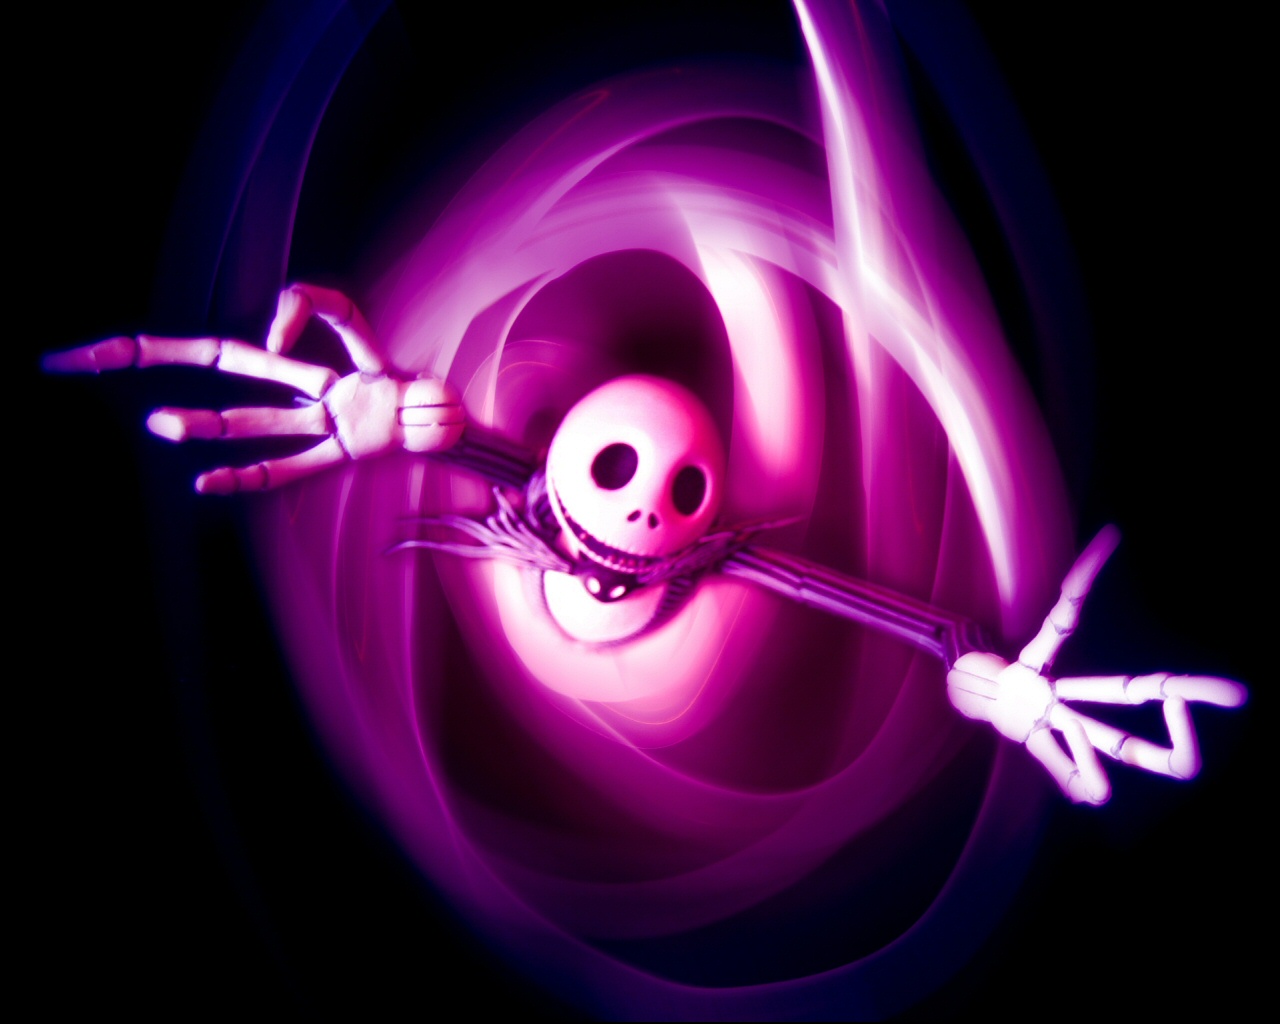 Popular The Nightmare Before Christmas Image for Phone